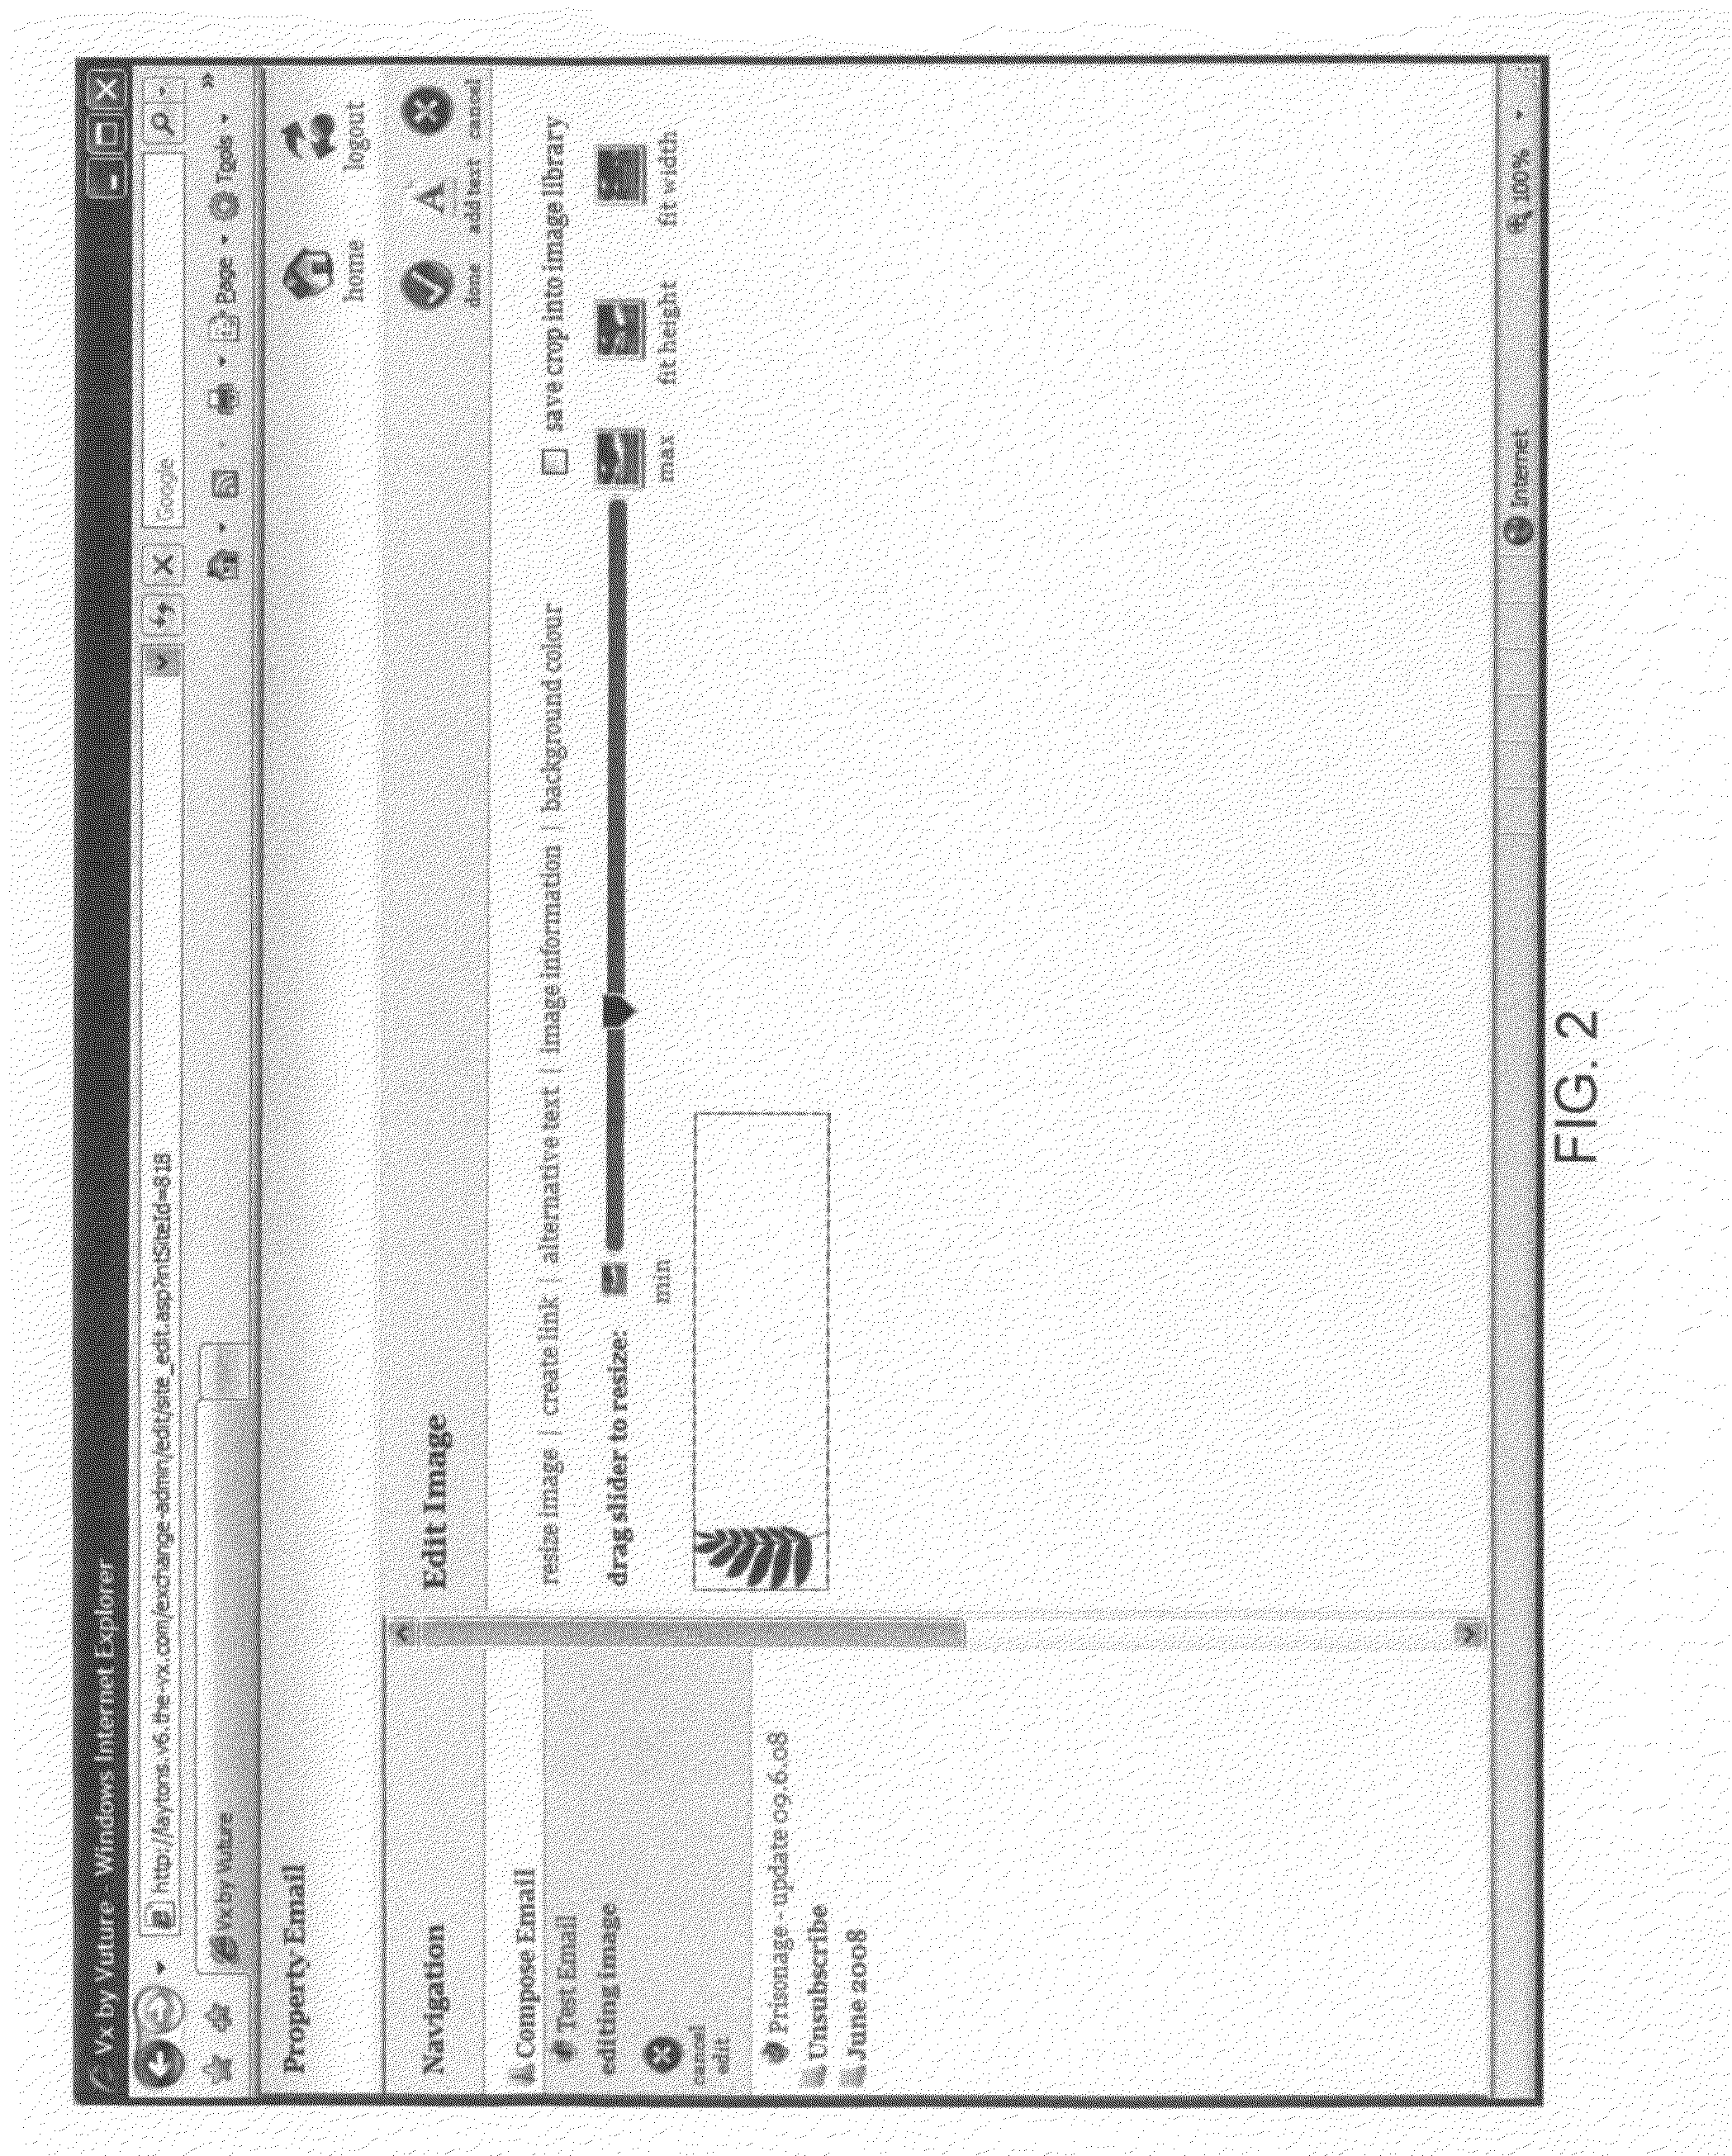 Systems and methods for processing online and print material